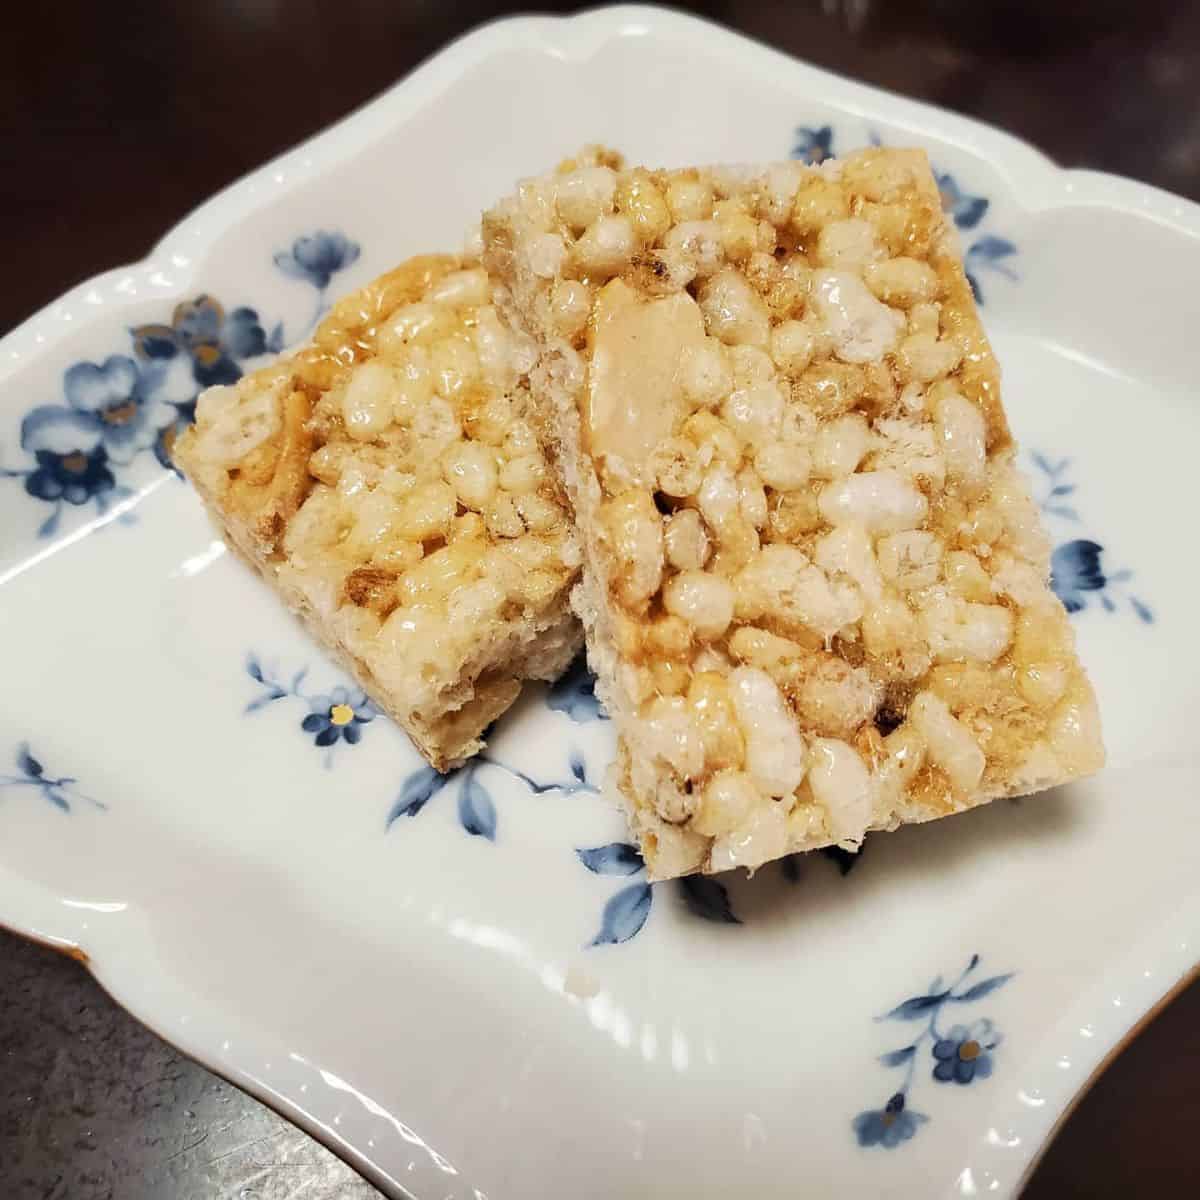 halal Japanese snack Kaminari Okoshi in a floral and square white plate